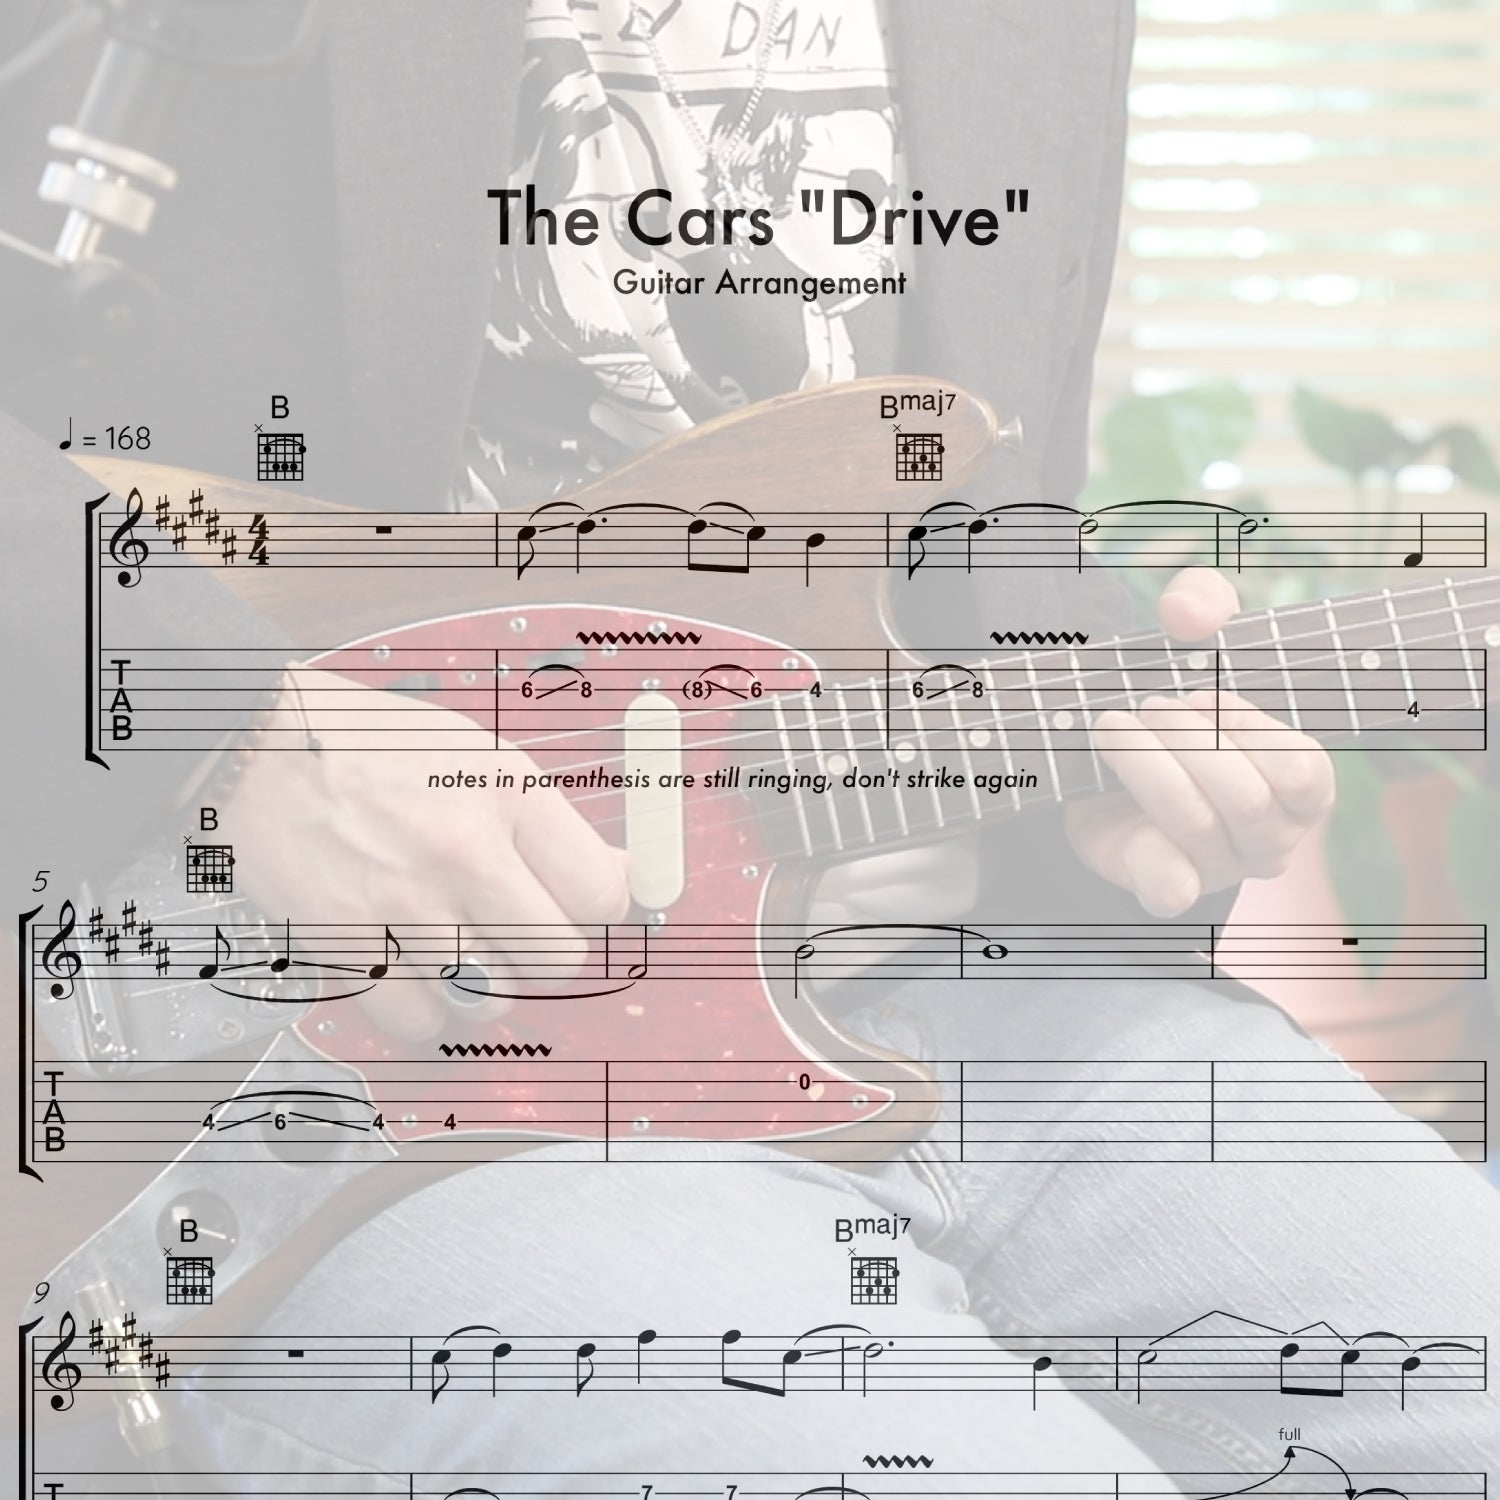 The Cars "Drive"